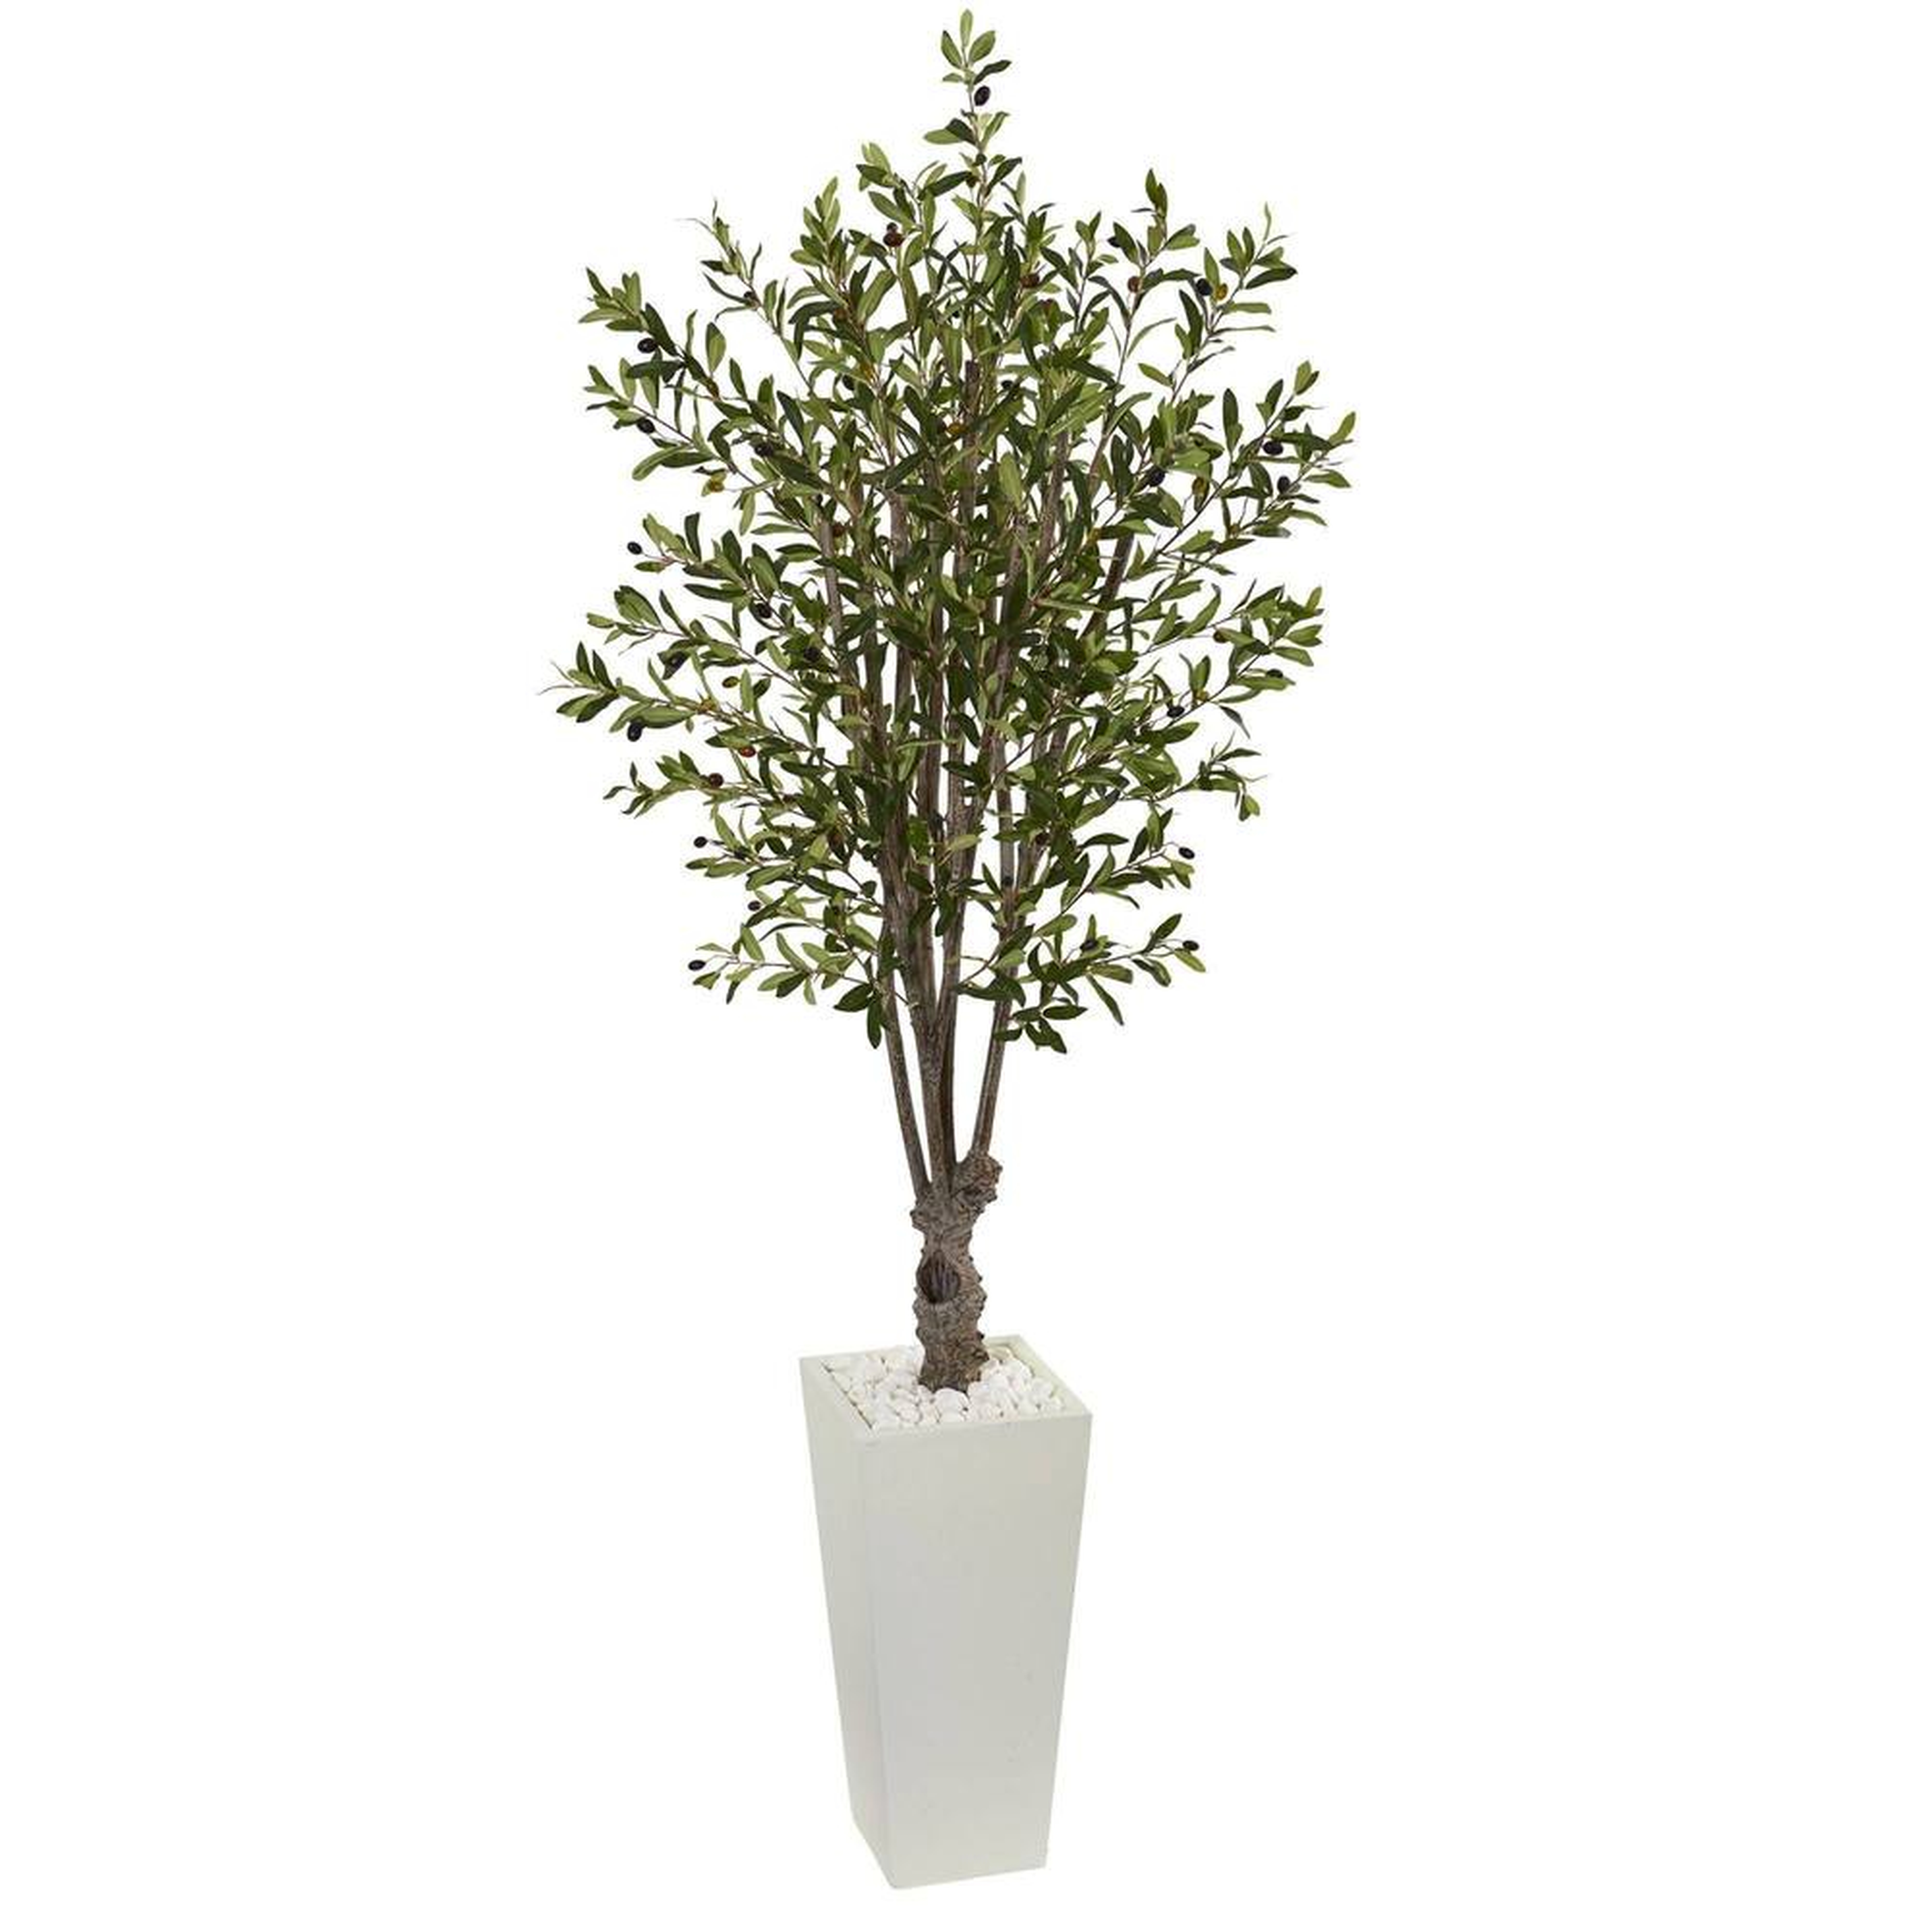 6' Olive Artificial Tree in White Tower Planter - Fiddle + Bloom